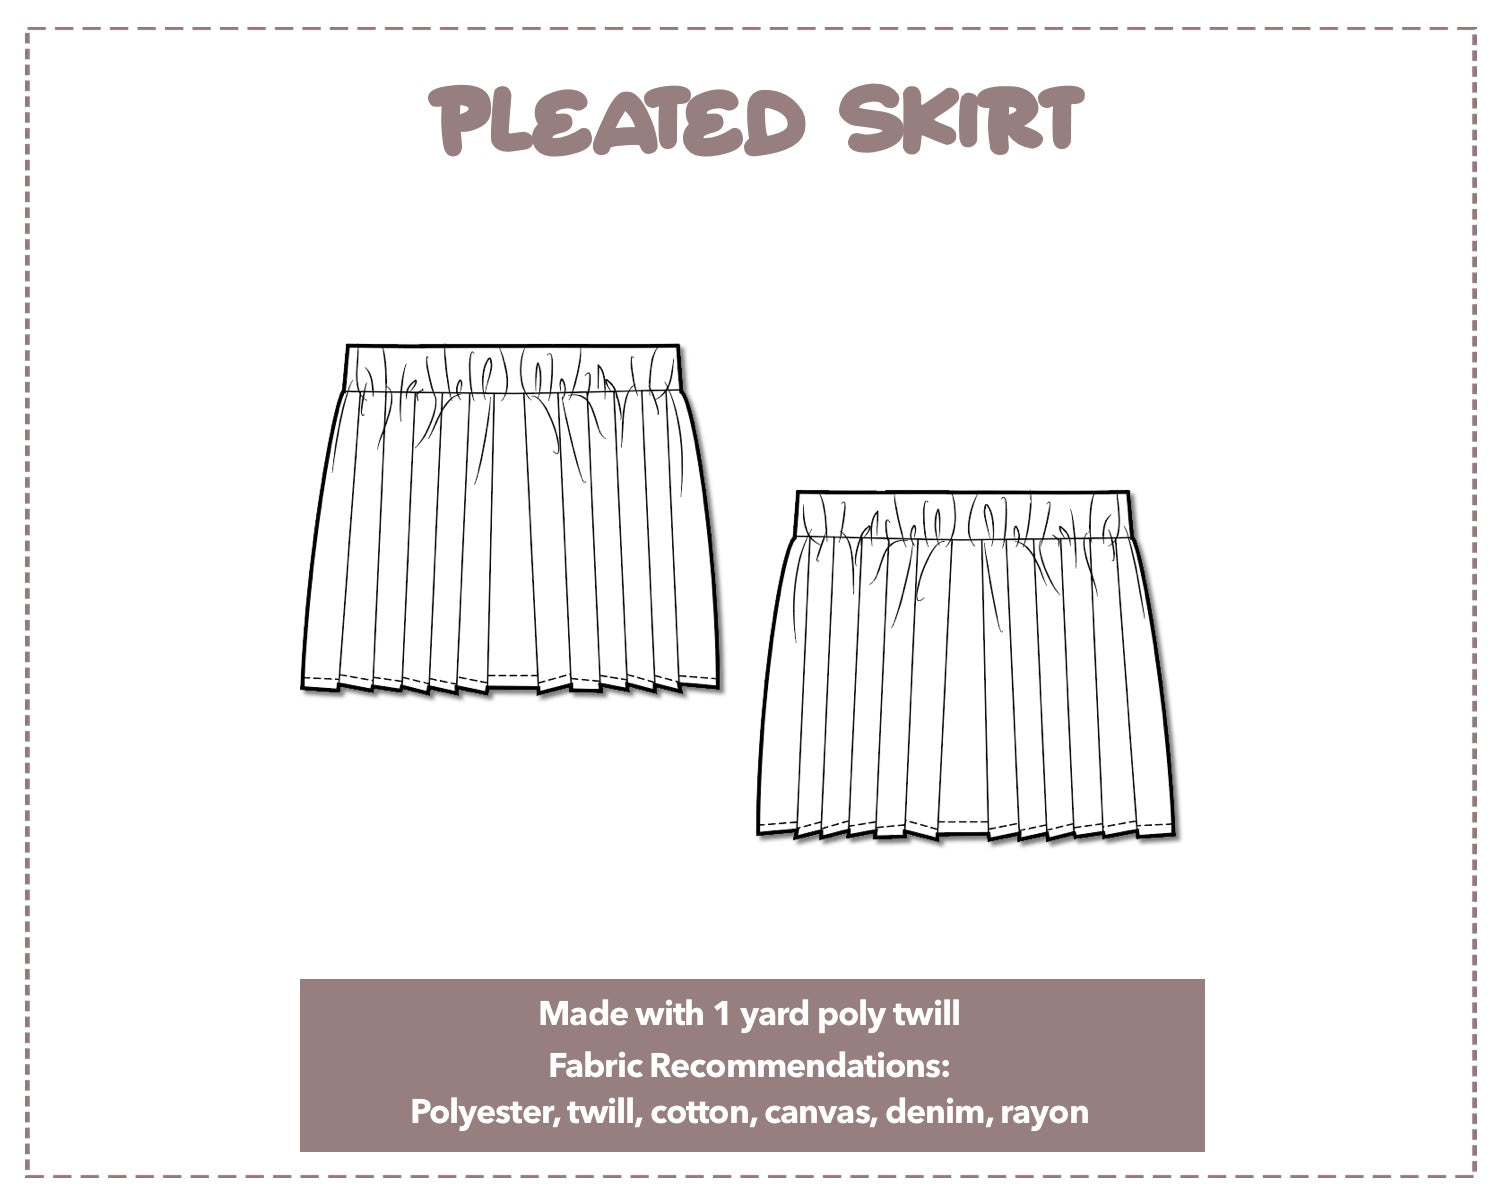 Illustration and detailed description for Elastic Waist Pleated Skirt sewing pattern.